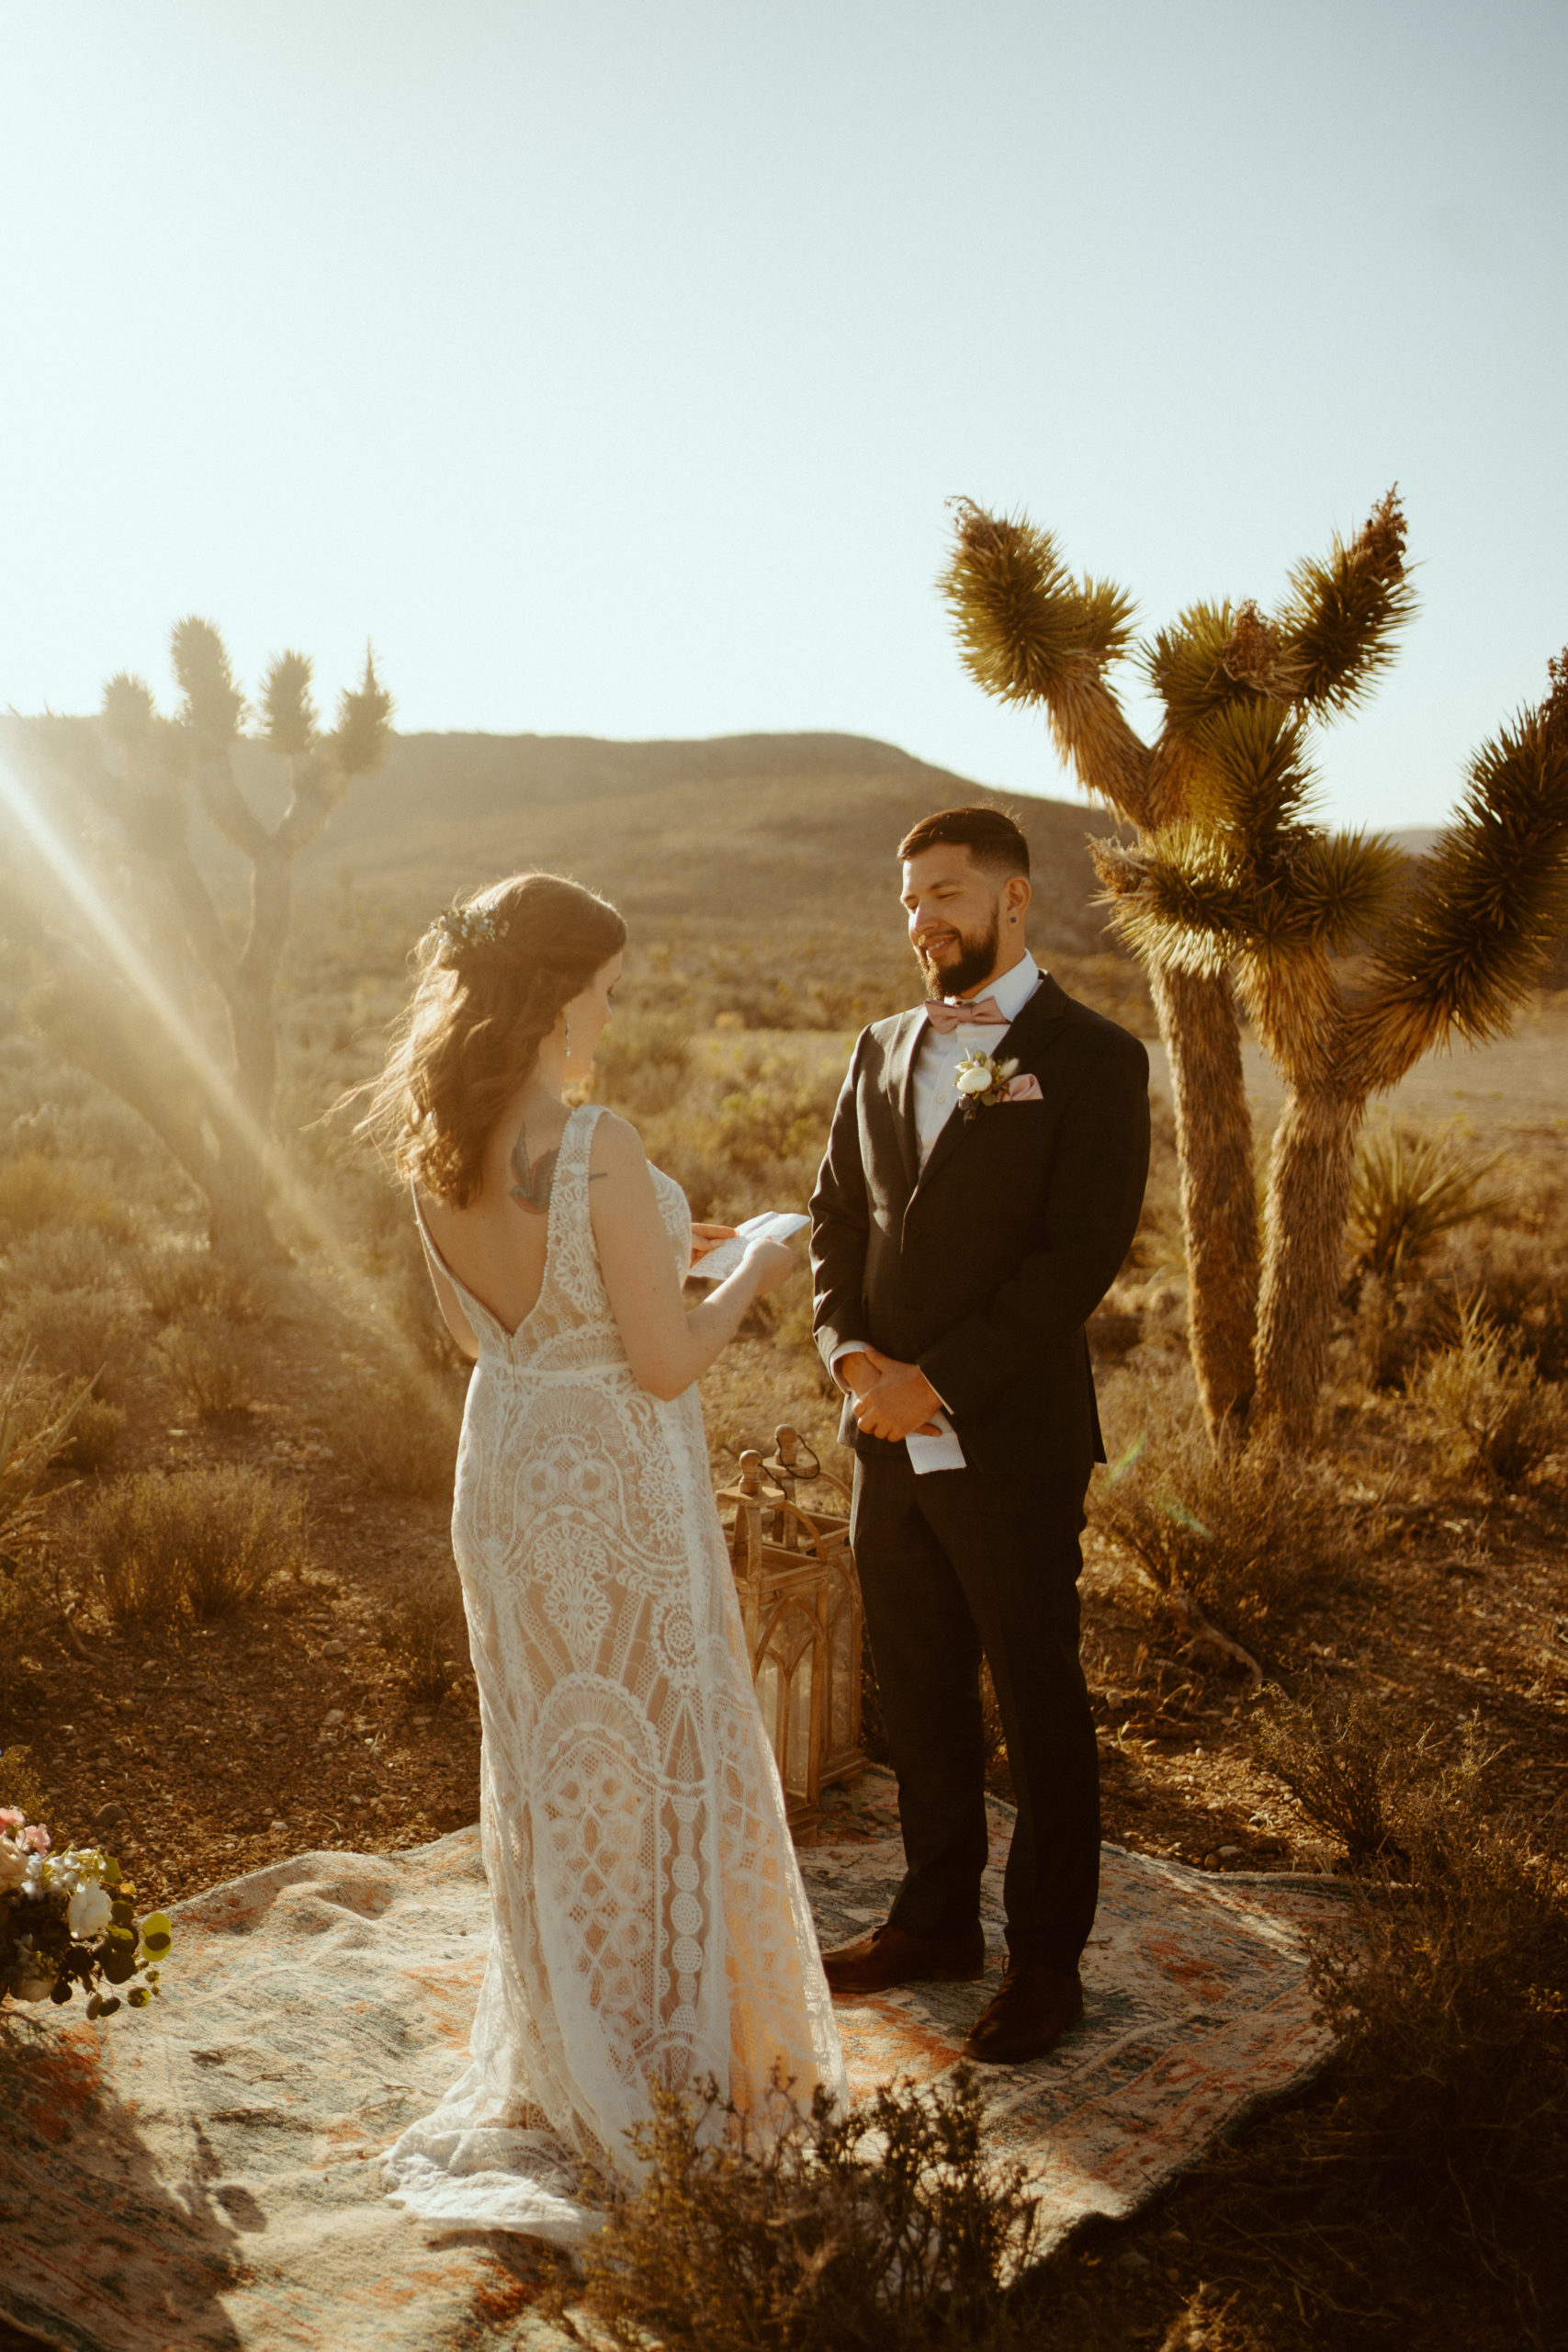 Couple sharing vows in Las Vegas location with Joshua trees 